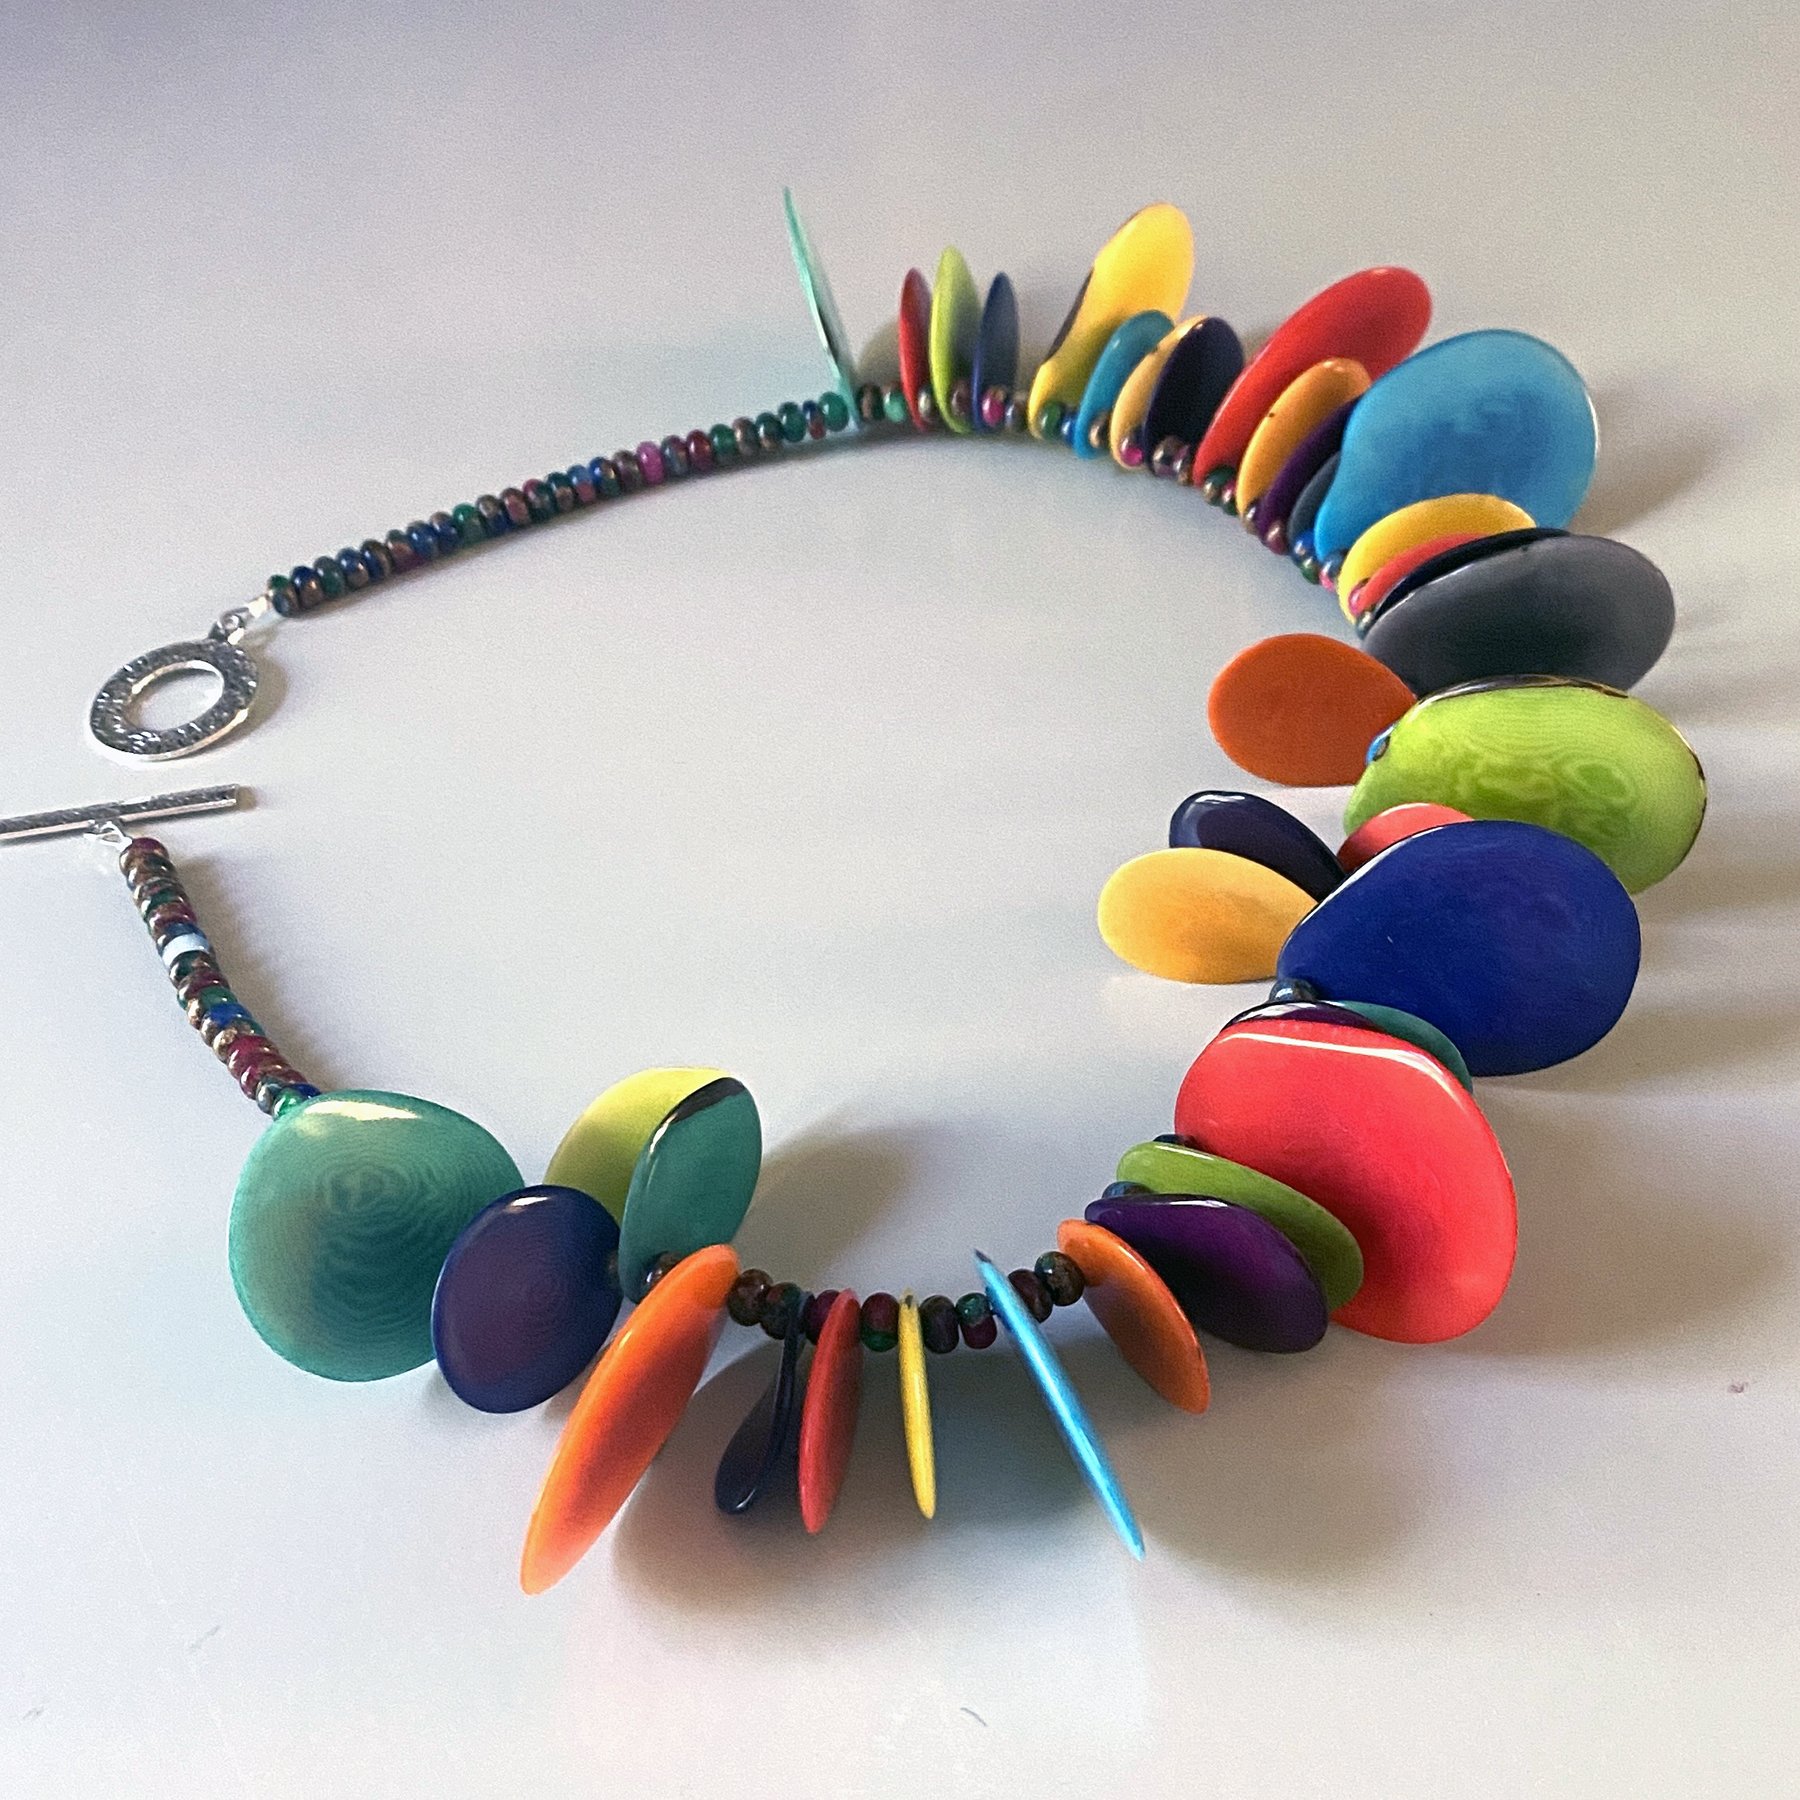 Dyed Tagua Nut Slices, Multi-Colored Resin Beads (Multi-colored) - 21.5  inches — Ventana Fine Art - Art Galleries Santa Fe NM - Contemporary Artist